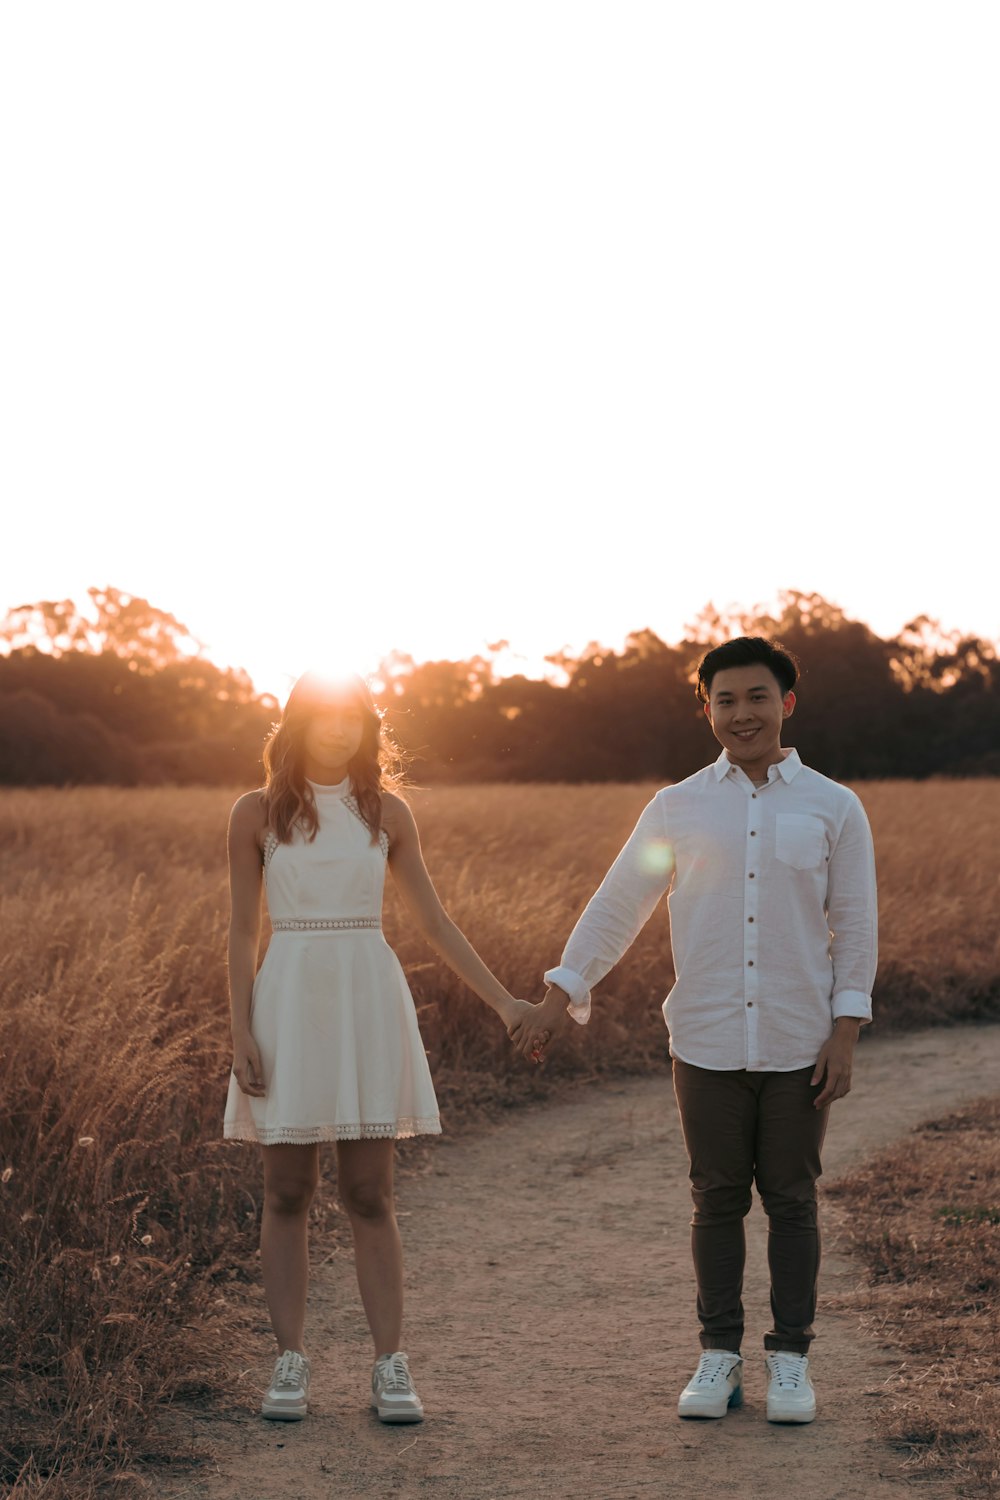 a man and woman walking on a dirt road with a sunset in the background